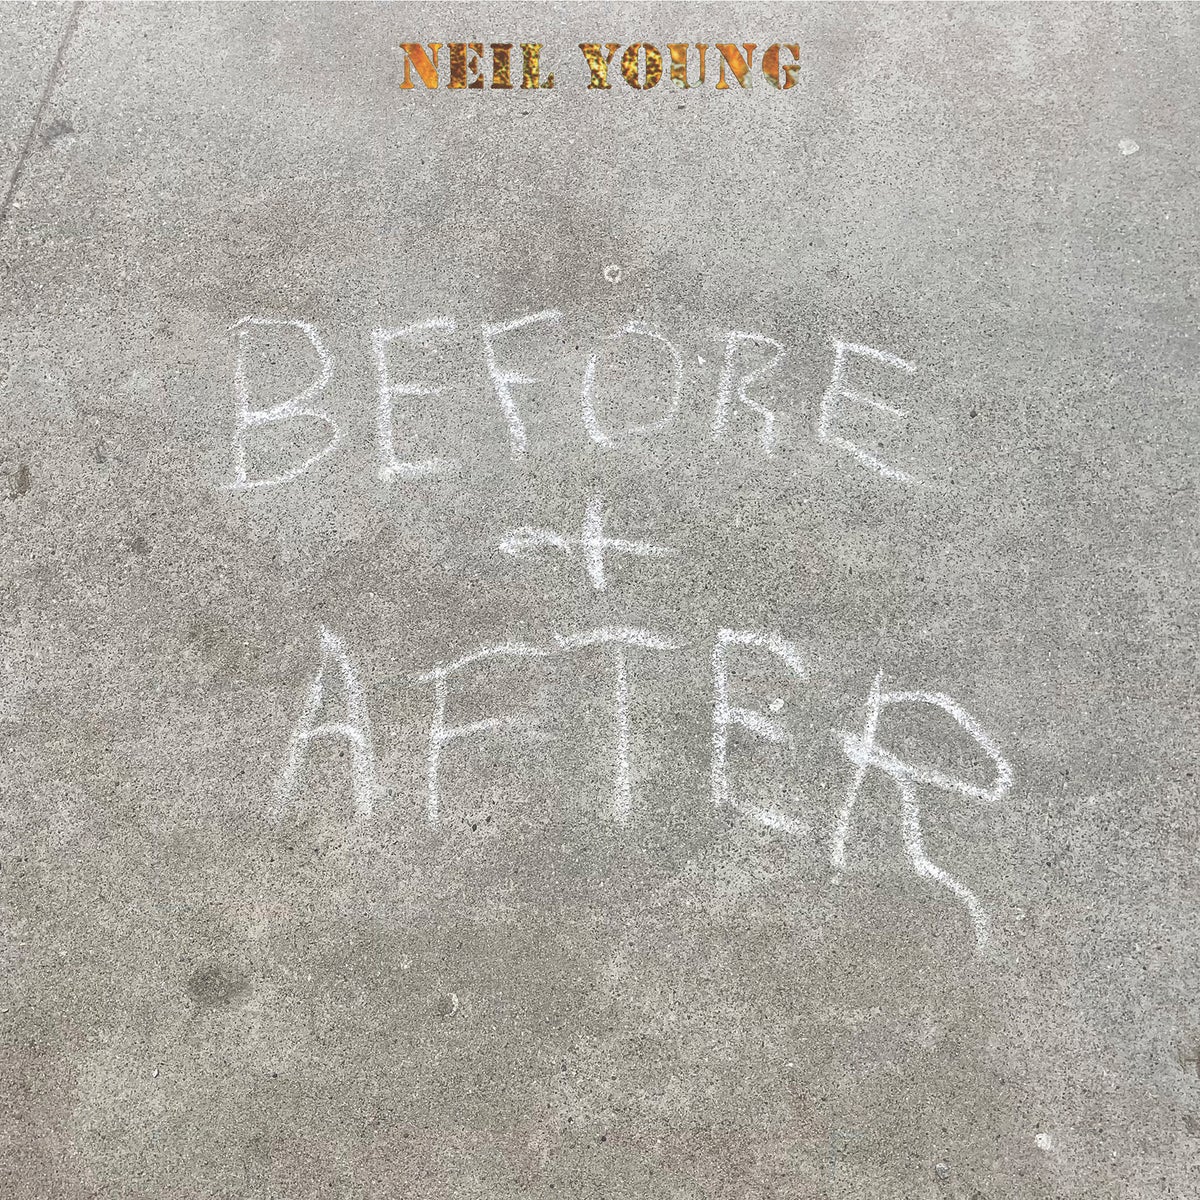 Music Review: Neil Young's 'Before and After' offers one continuous stream of rarities